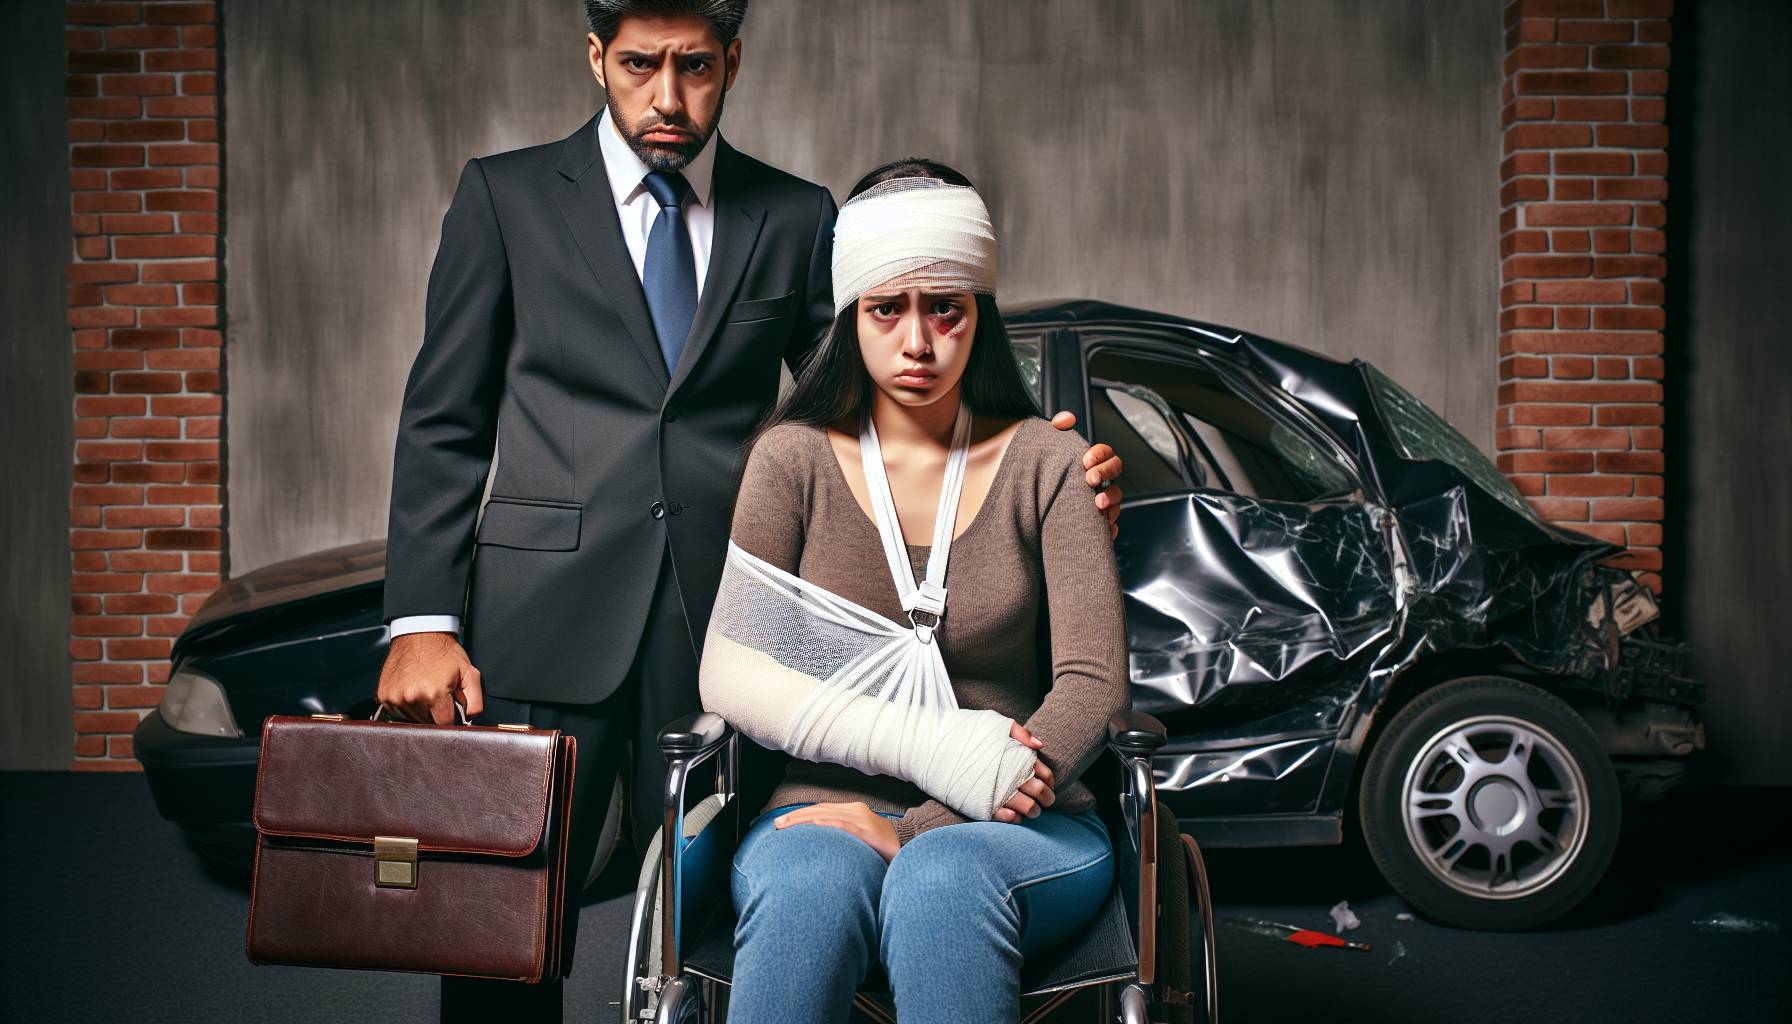 Injured person in need of legal representation